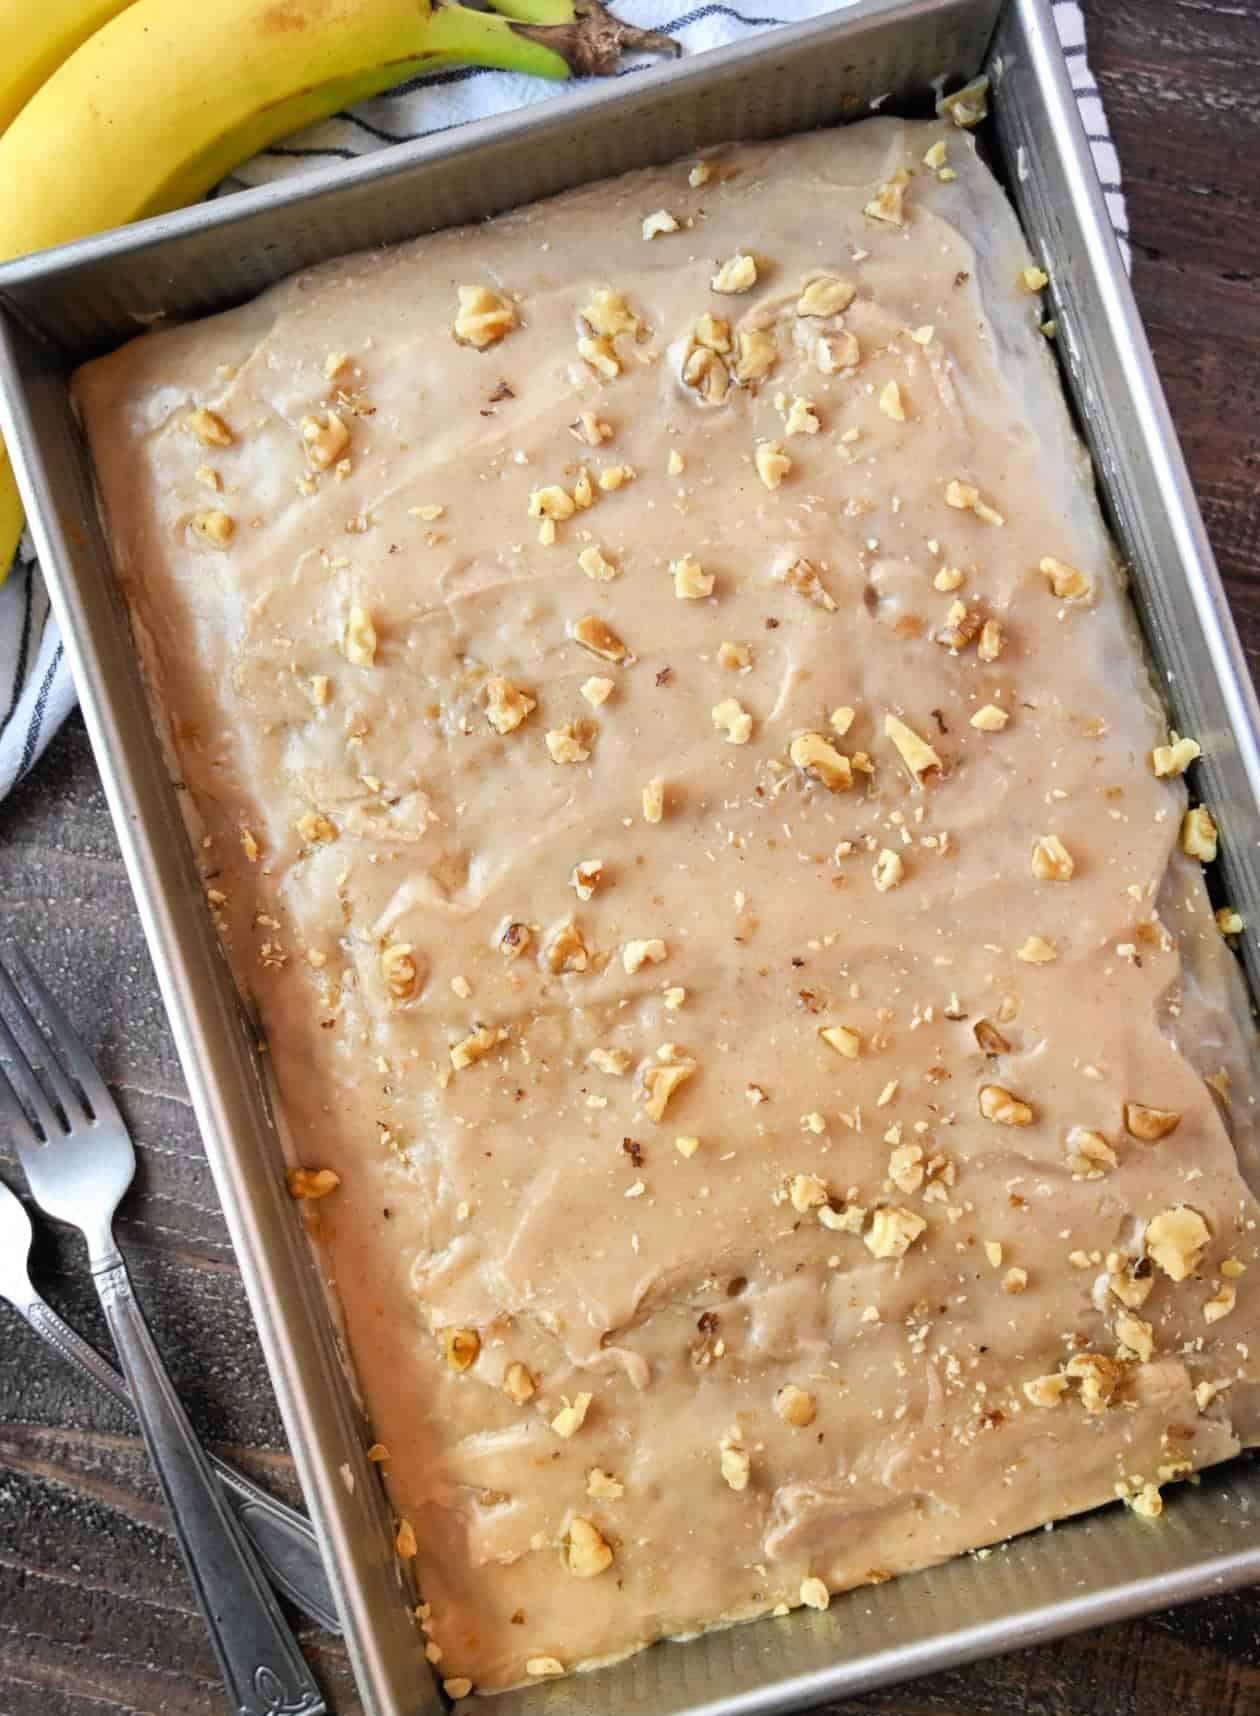 Cake baked in a pan and frosted with chopped walnuts on top.